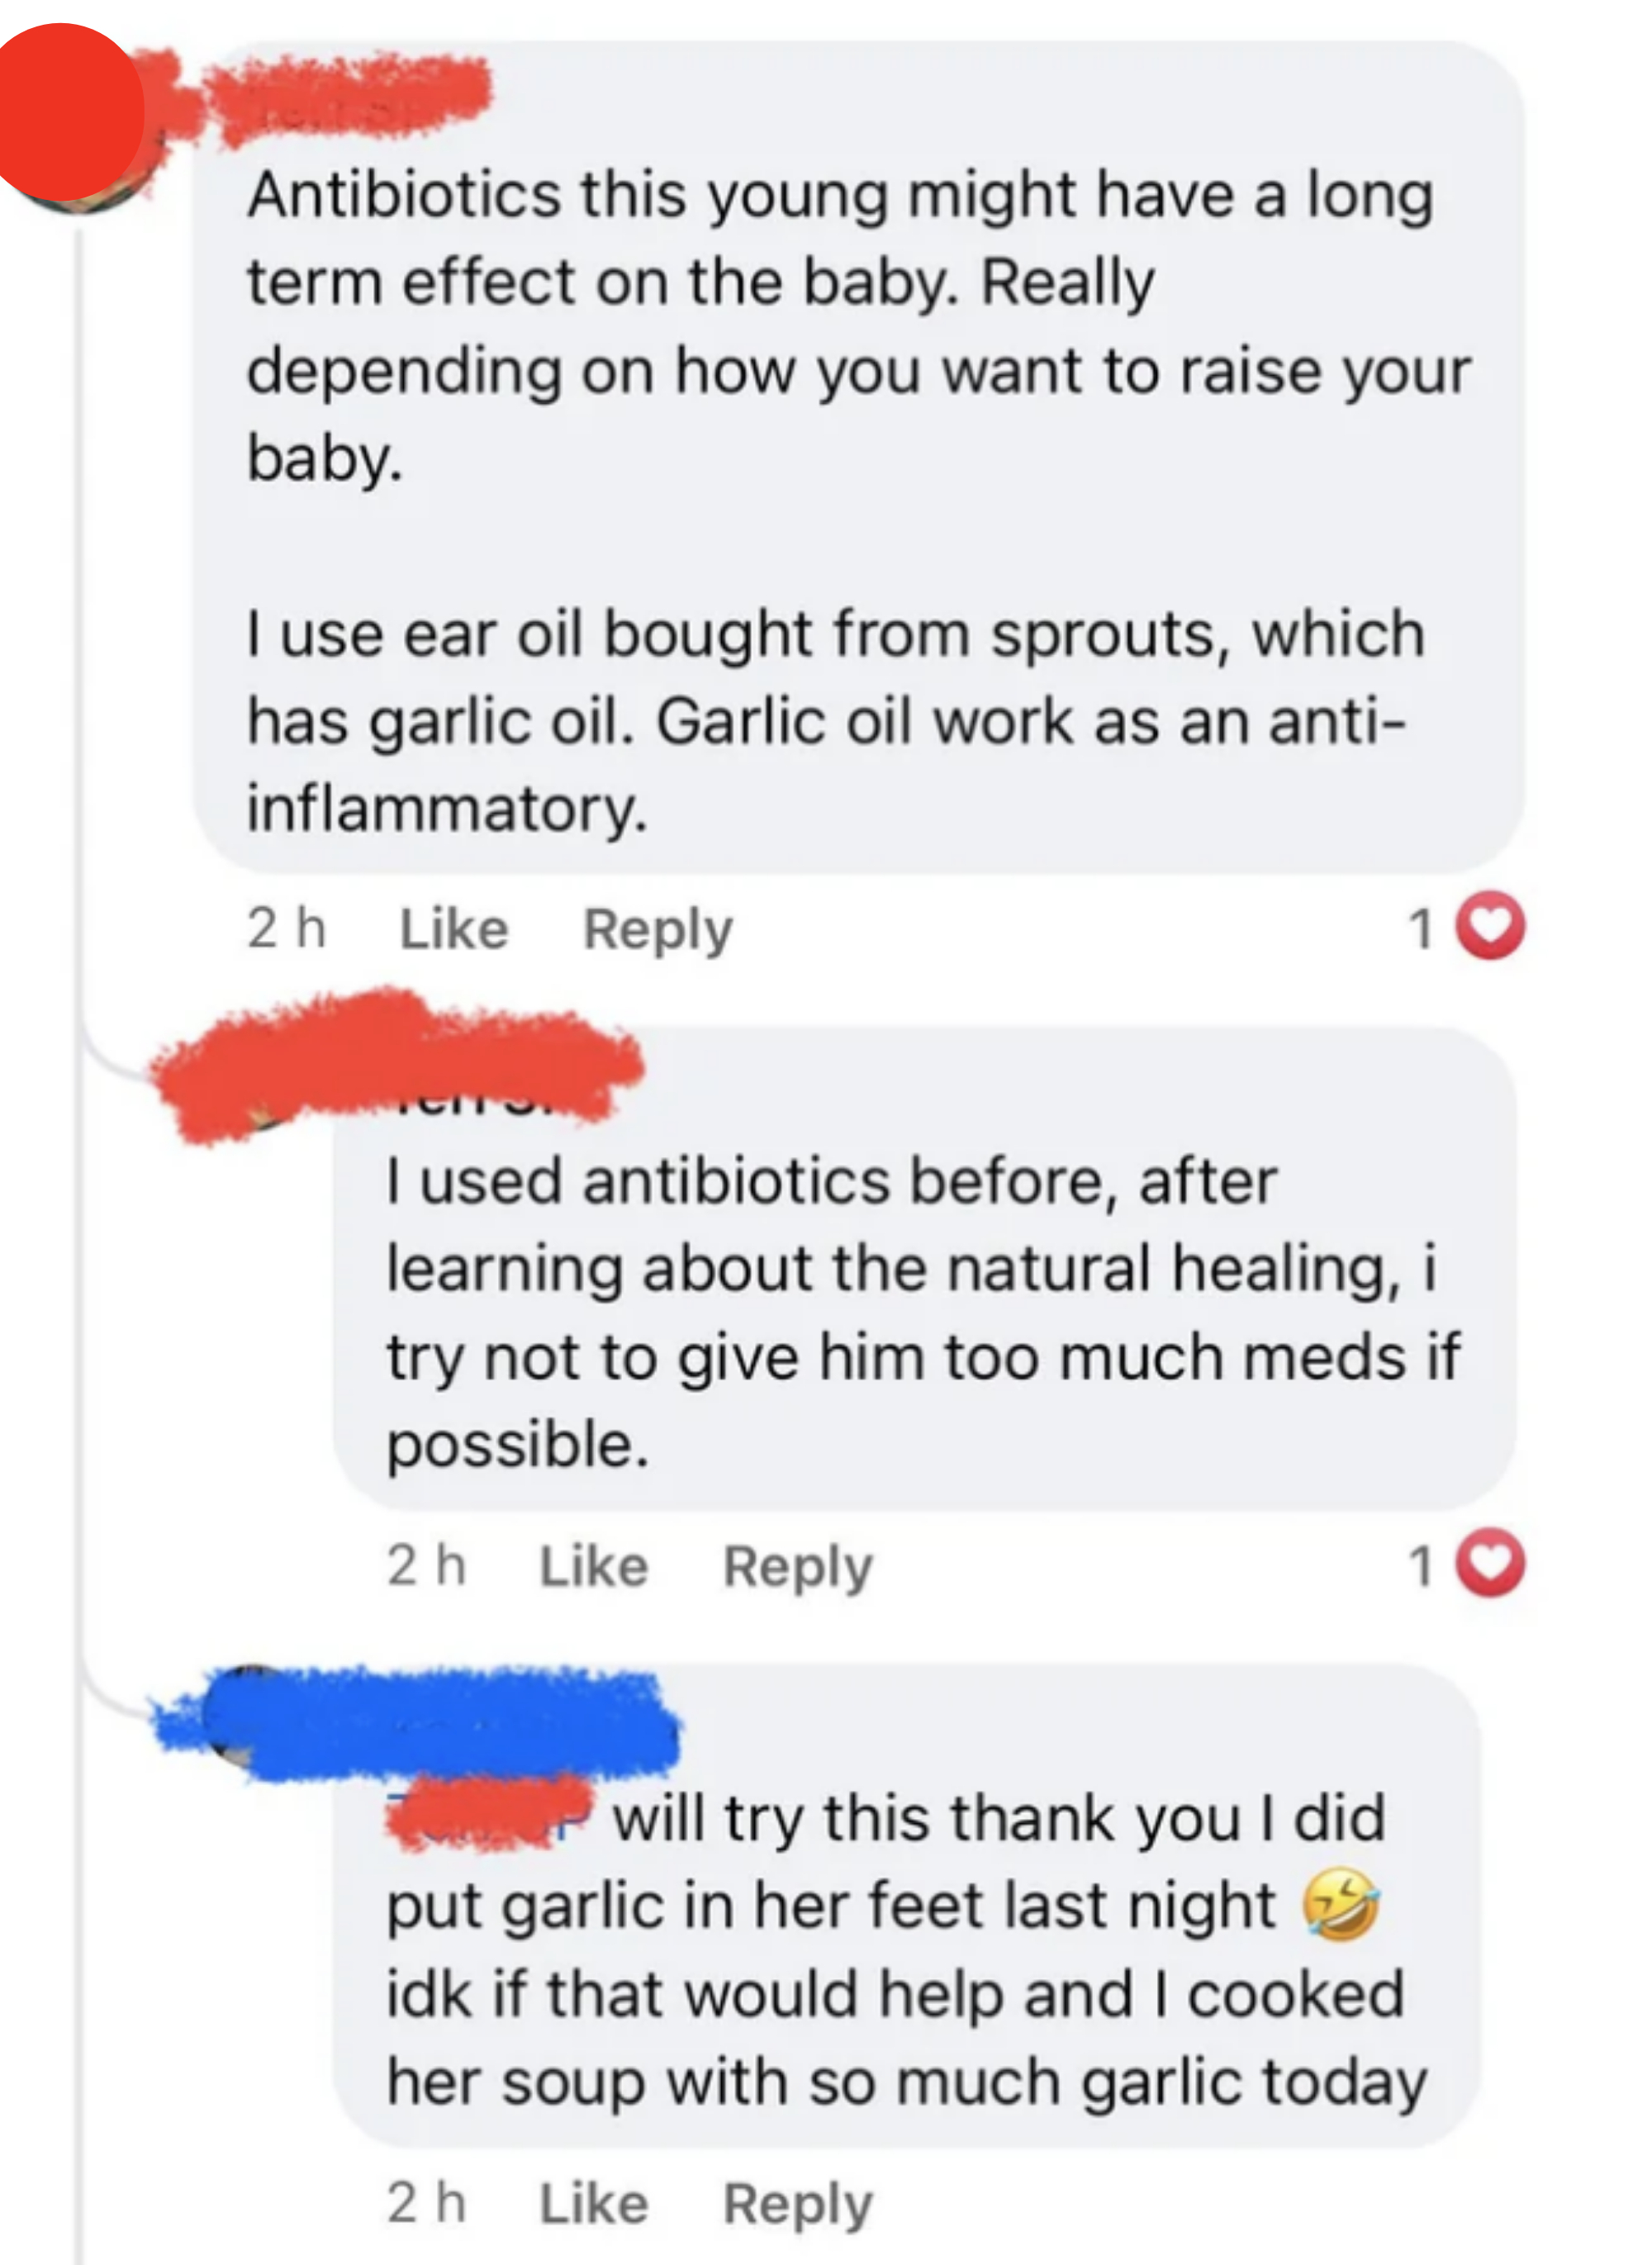 Person says &quot;antibiotics this young might have a long-term effect on the baby&quot; and &quot;I use ear oil bought from sprouts, which has garlic oil as an anti-inflammatory&quot; and another says they try not to give antibiotics after learning about natural healing